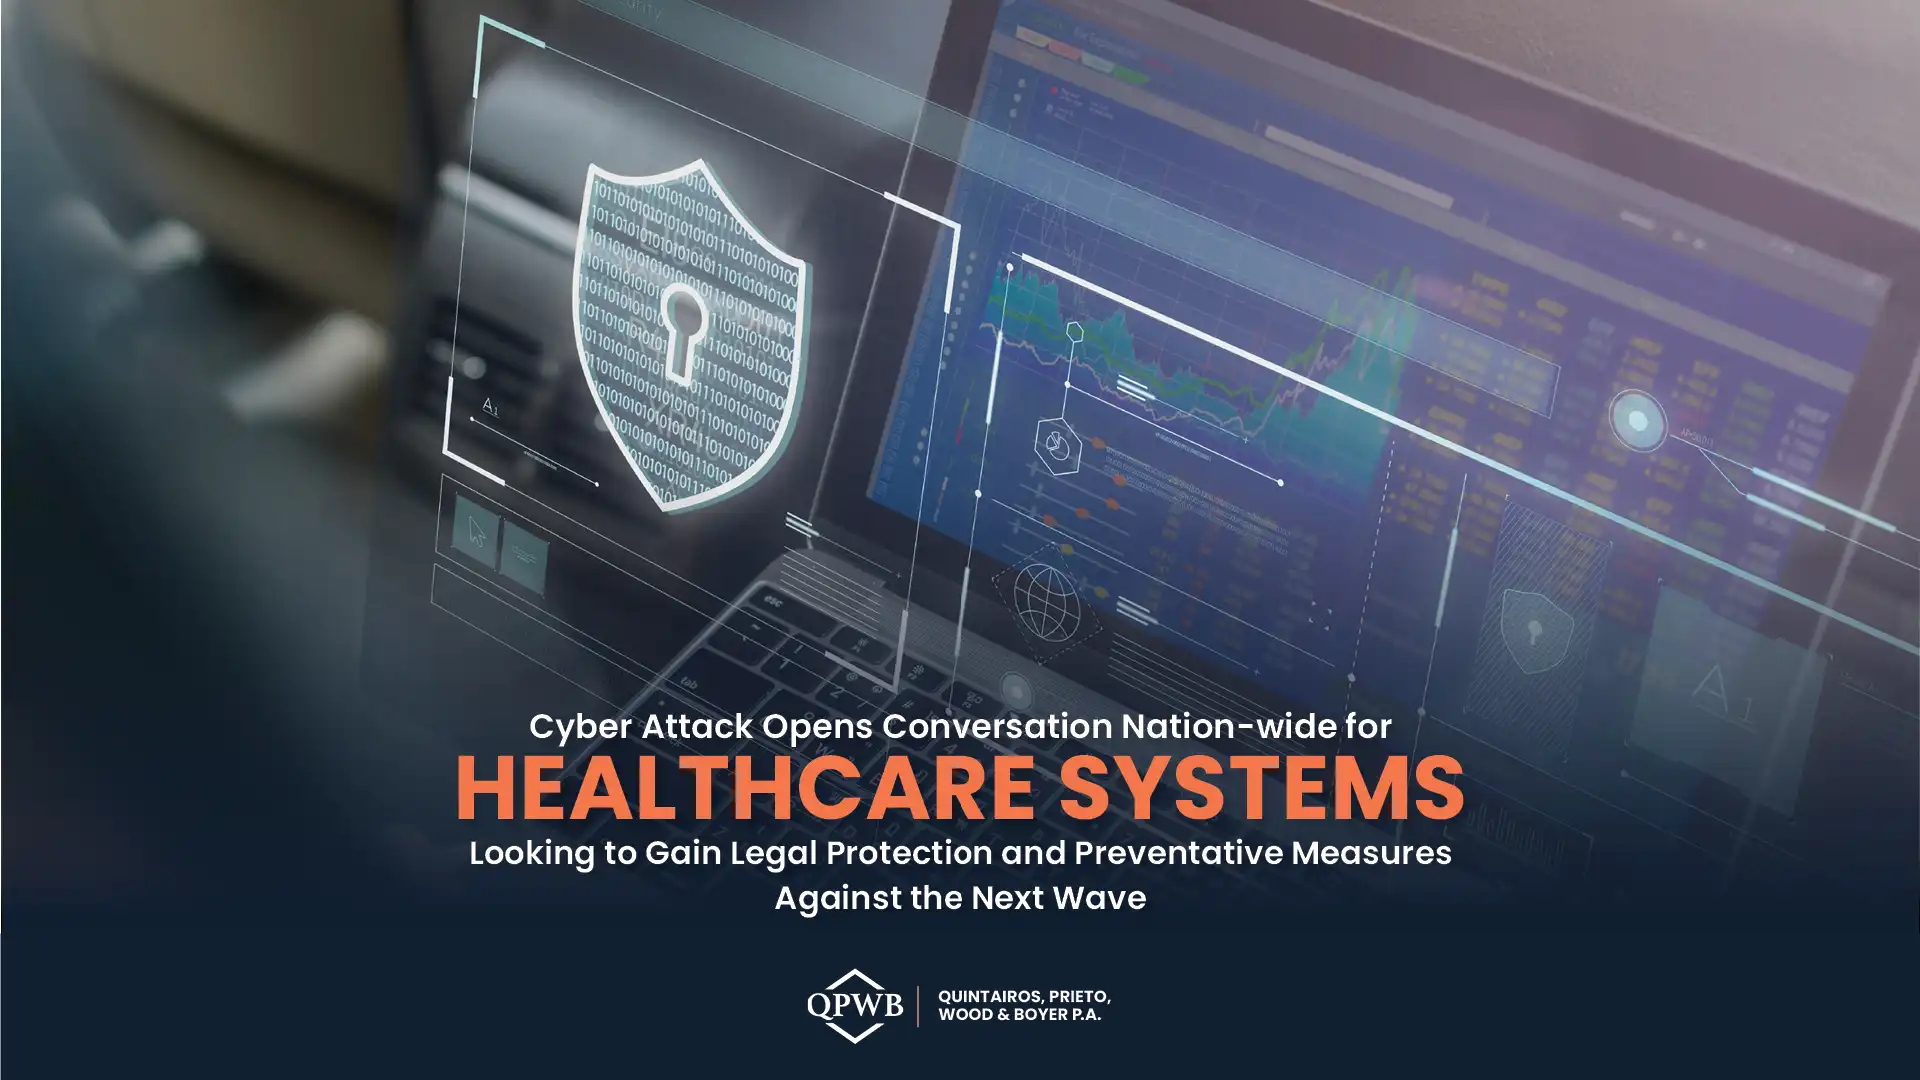 Cyber Attack Opens Conversation Nation-wide for Healthcare Systems Looking to Gain Legal Protection and Preventative Measures Against the Next Wave